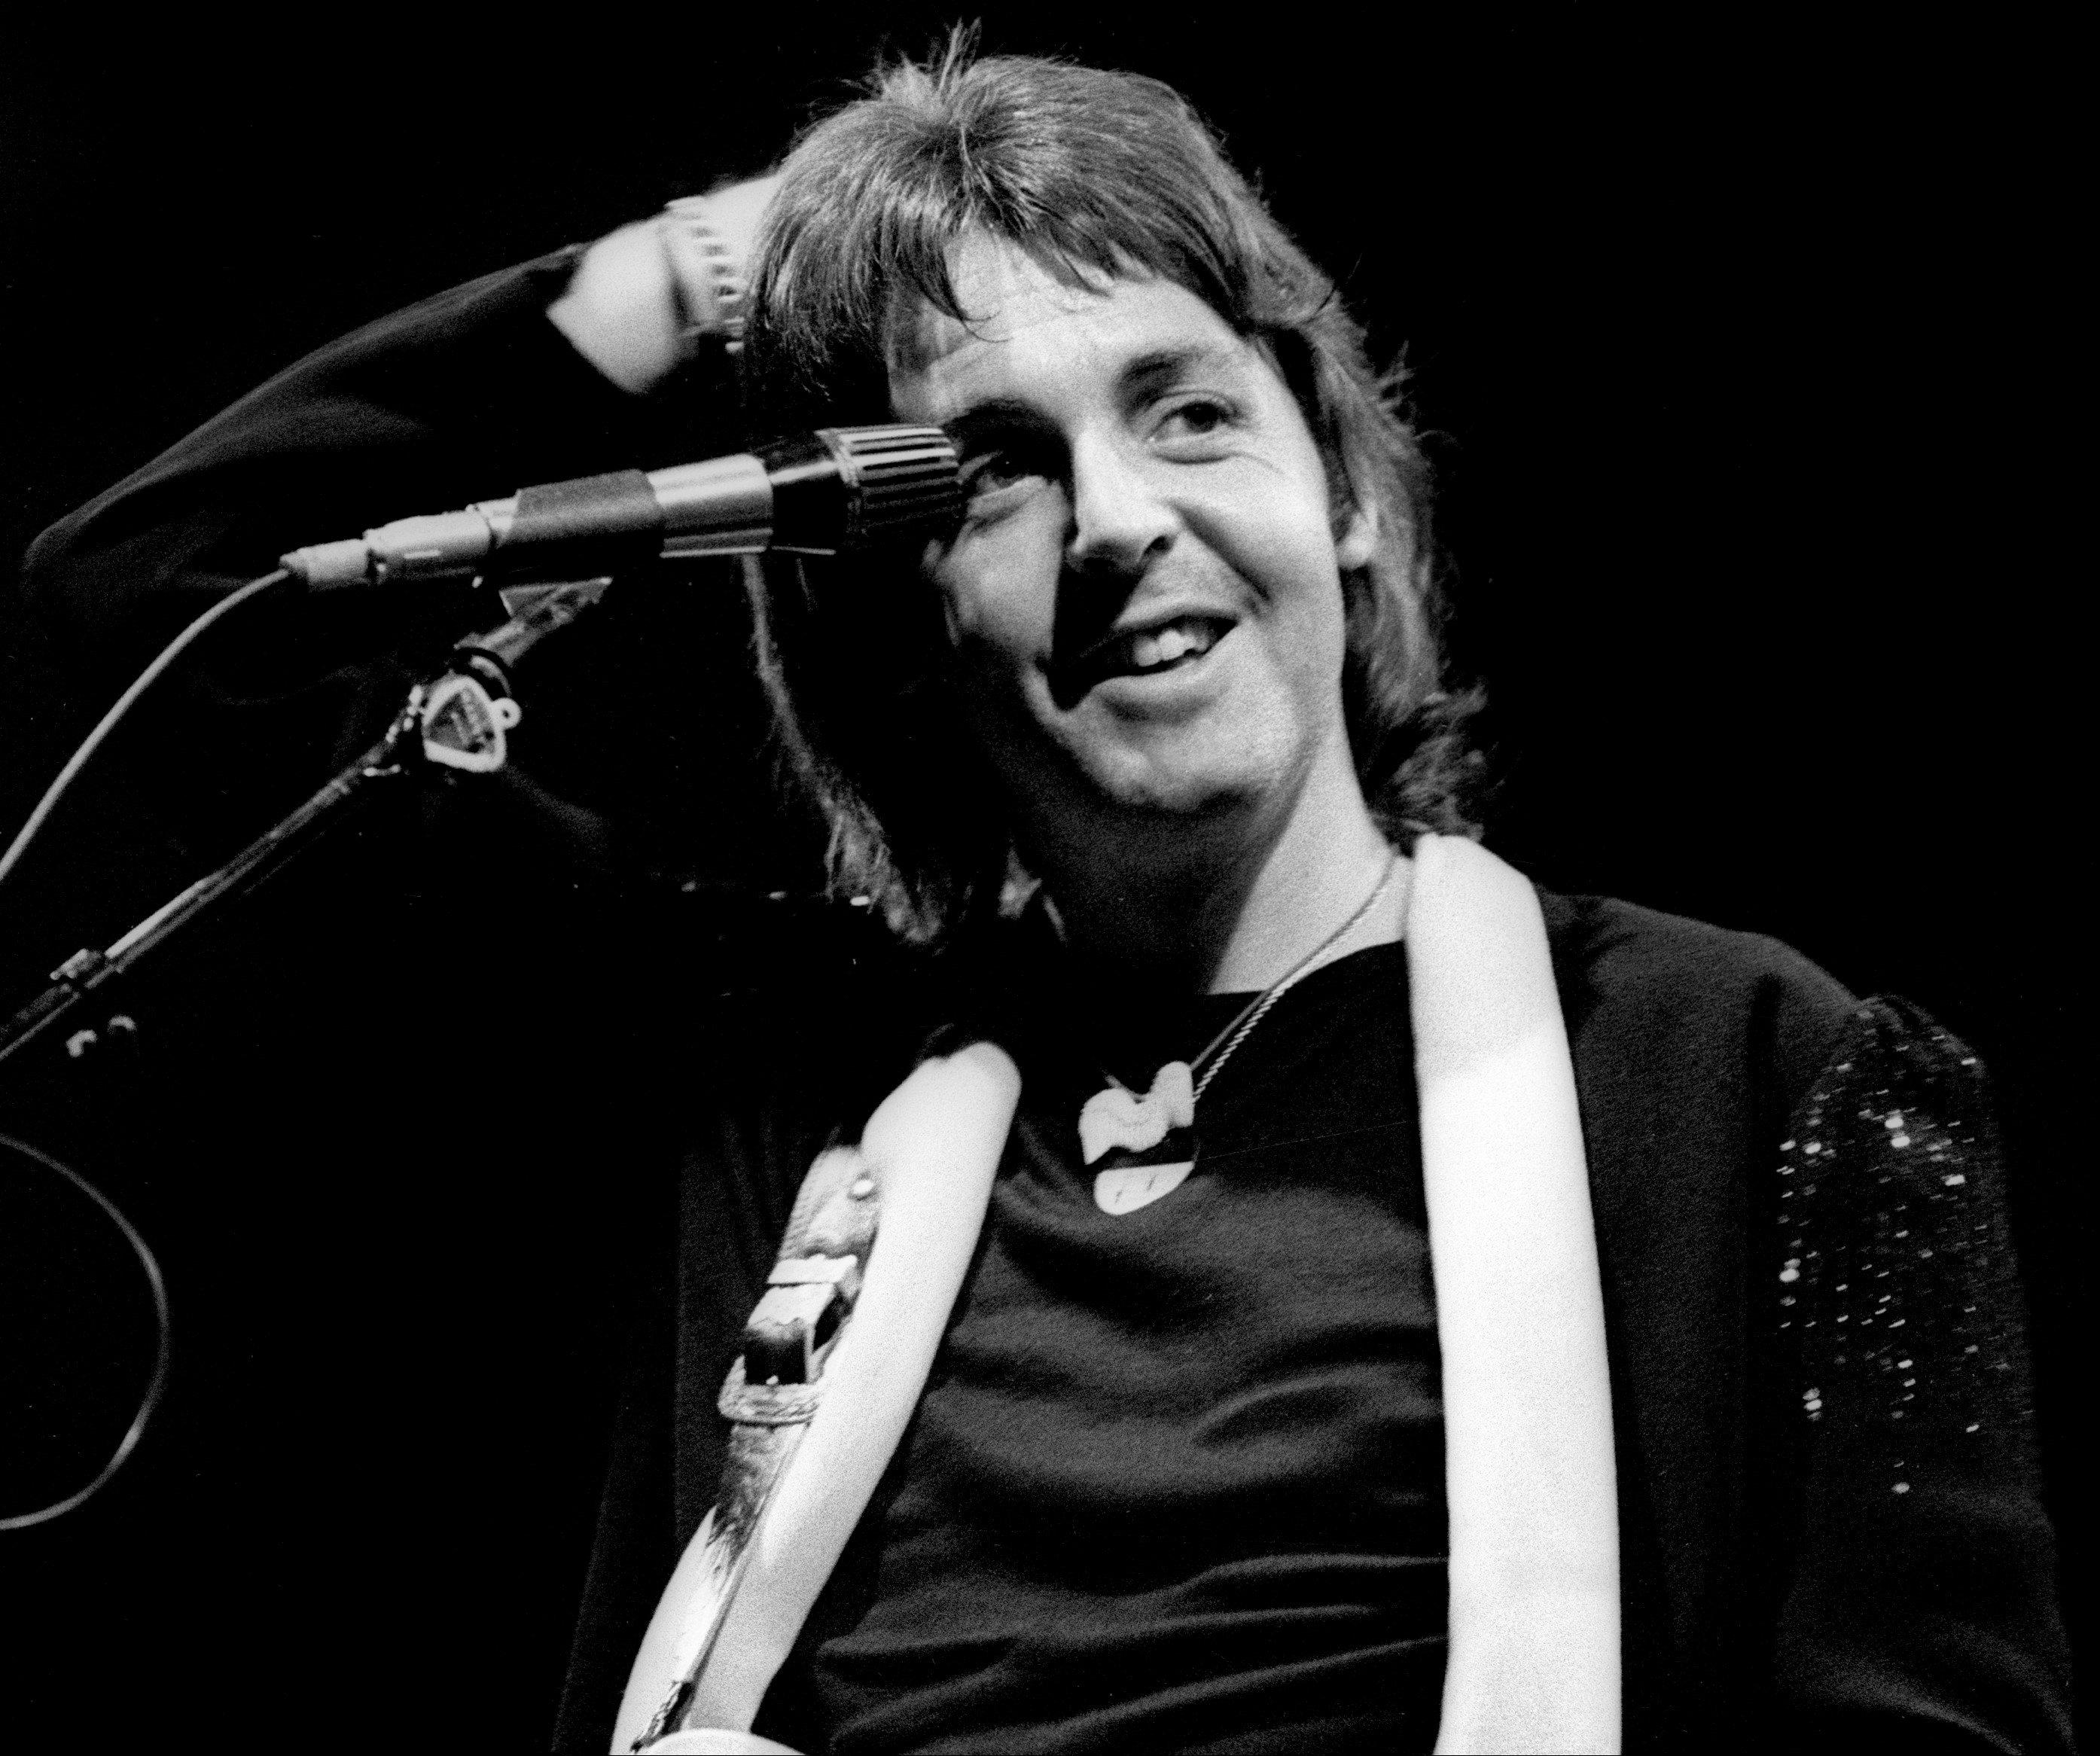 "Another Day" singer Paul McCartney in black-and-white